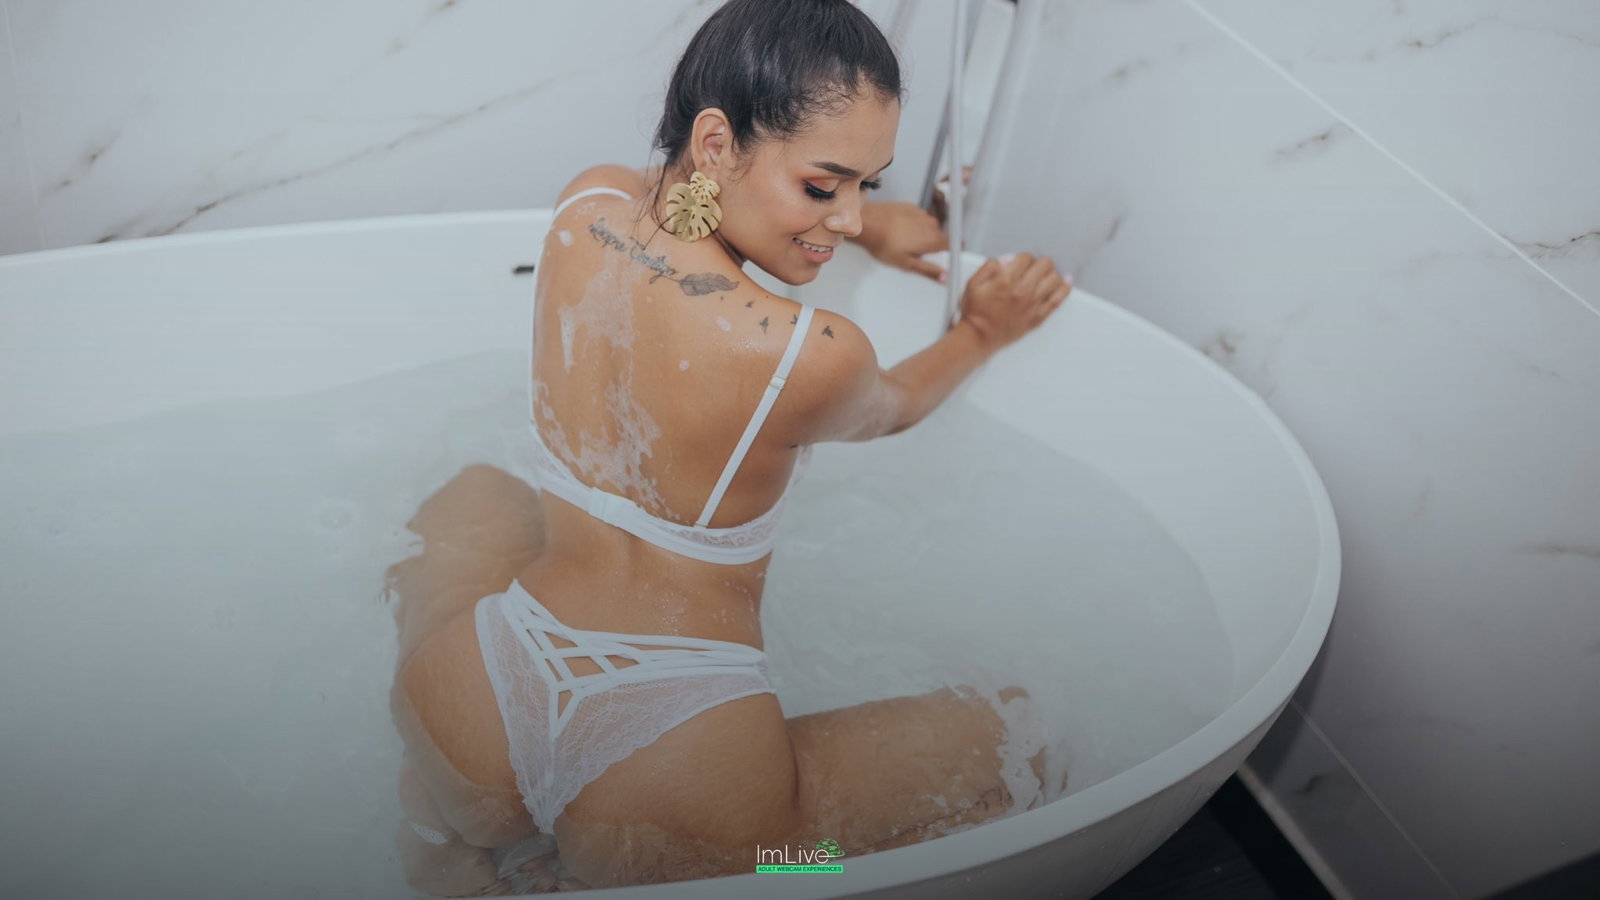 Photo by ImLive with the username @imlivenet, who is a brand user,  December 29, 2020 at 11:09 AM and the text says 'Follow Her on ImLive 🔥

👉 http://imlurl.com/4Bhyvu 

[#imliveonImlive #pornlive #livecam #chatlive #stayhomedontdate #Ass #Sexy #porn #webcam #horny #pornovideo #pornogirl #porno #pornhub #pornstar #pornostar #porngirl #pornmodel #bdsm #hot #hotladies..'